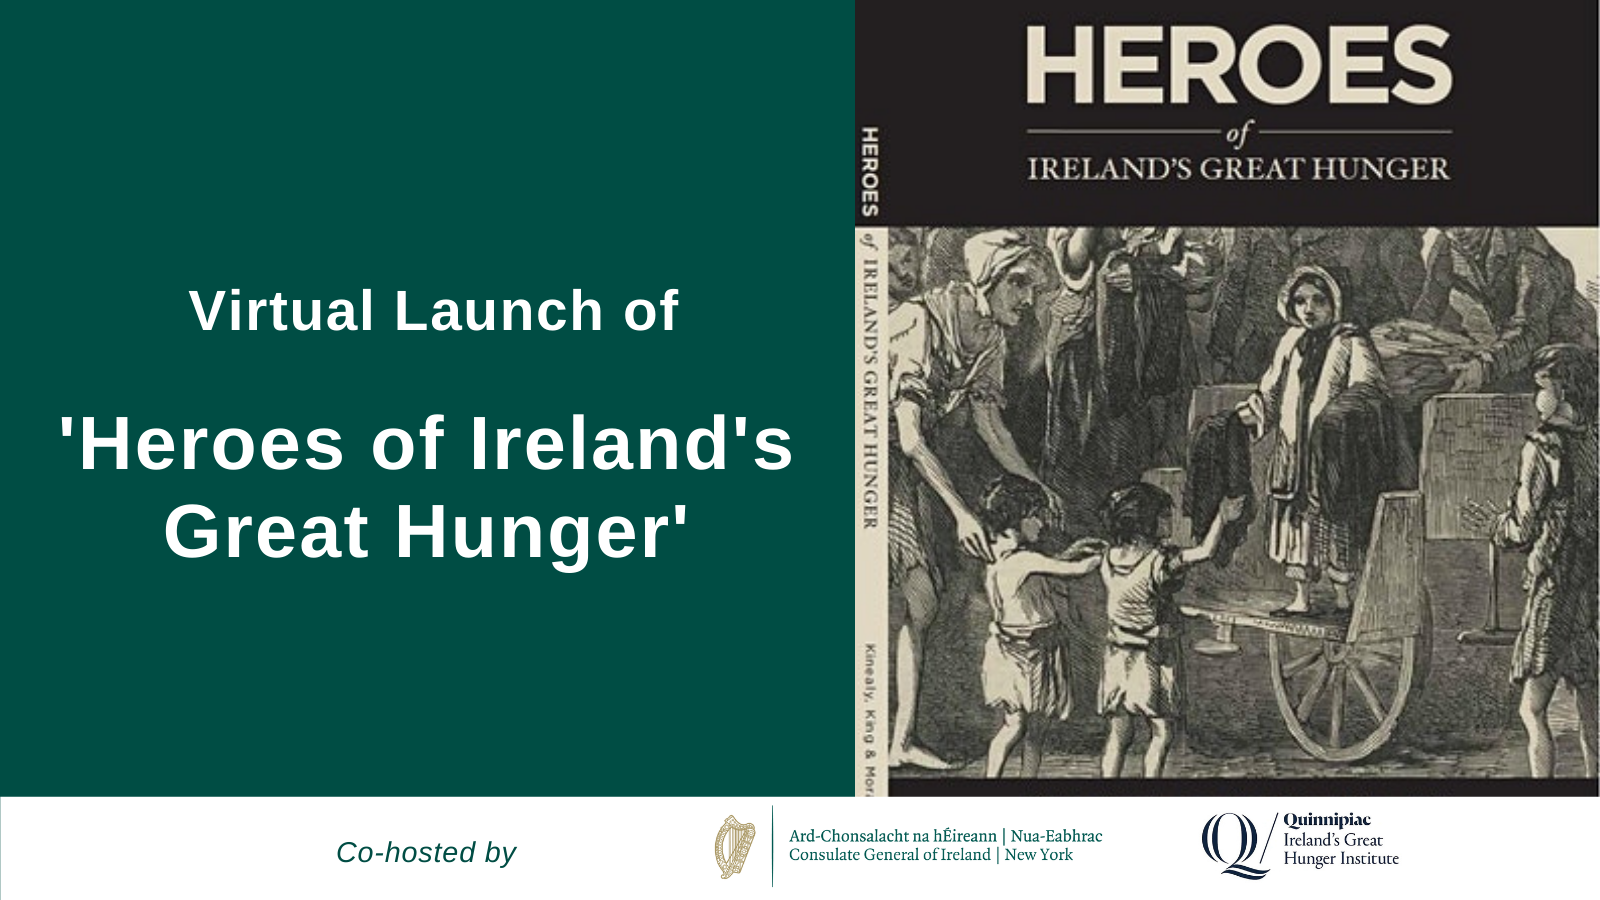 Virtual Launch of 'Heroes of Ireland's Great Hunger'